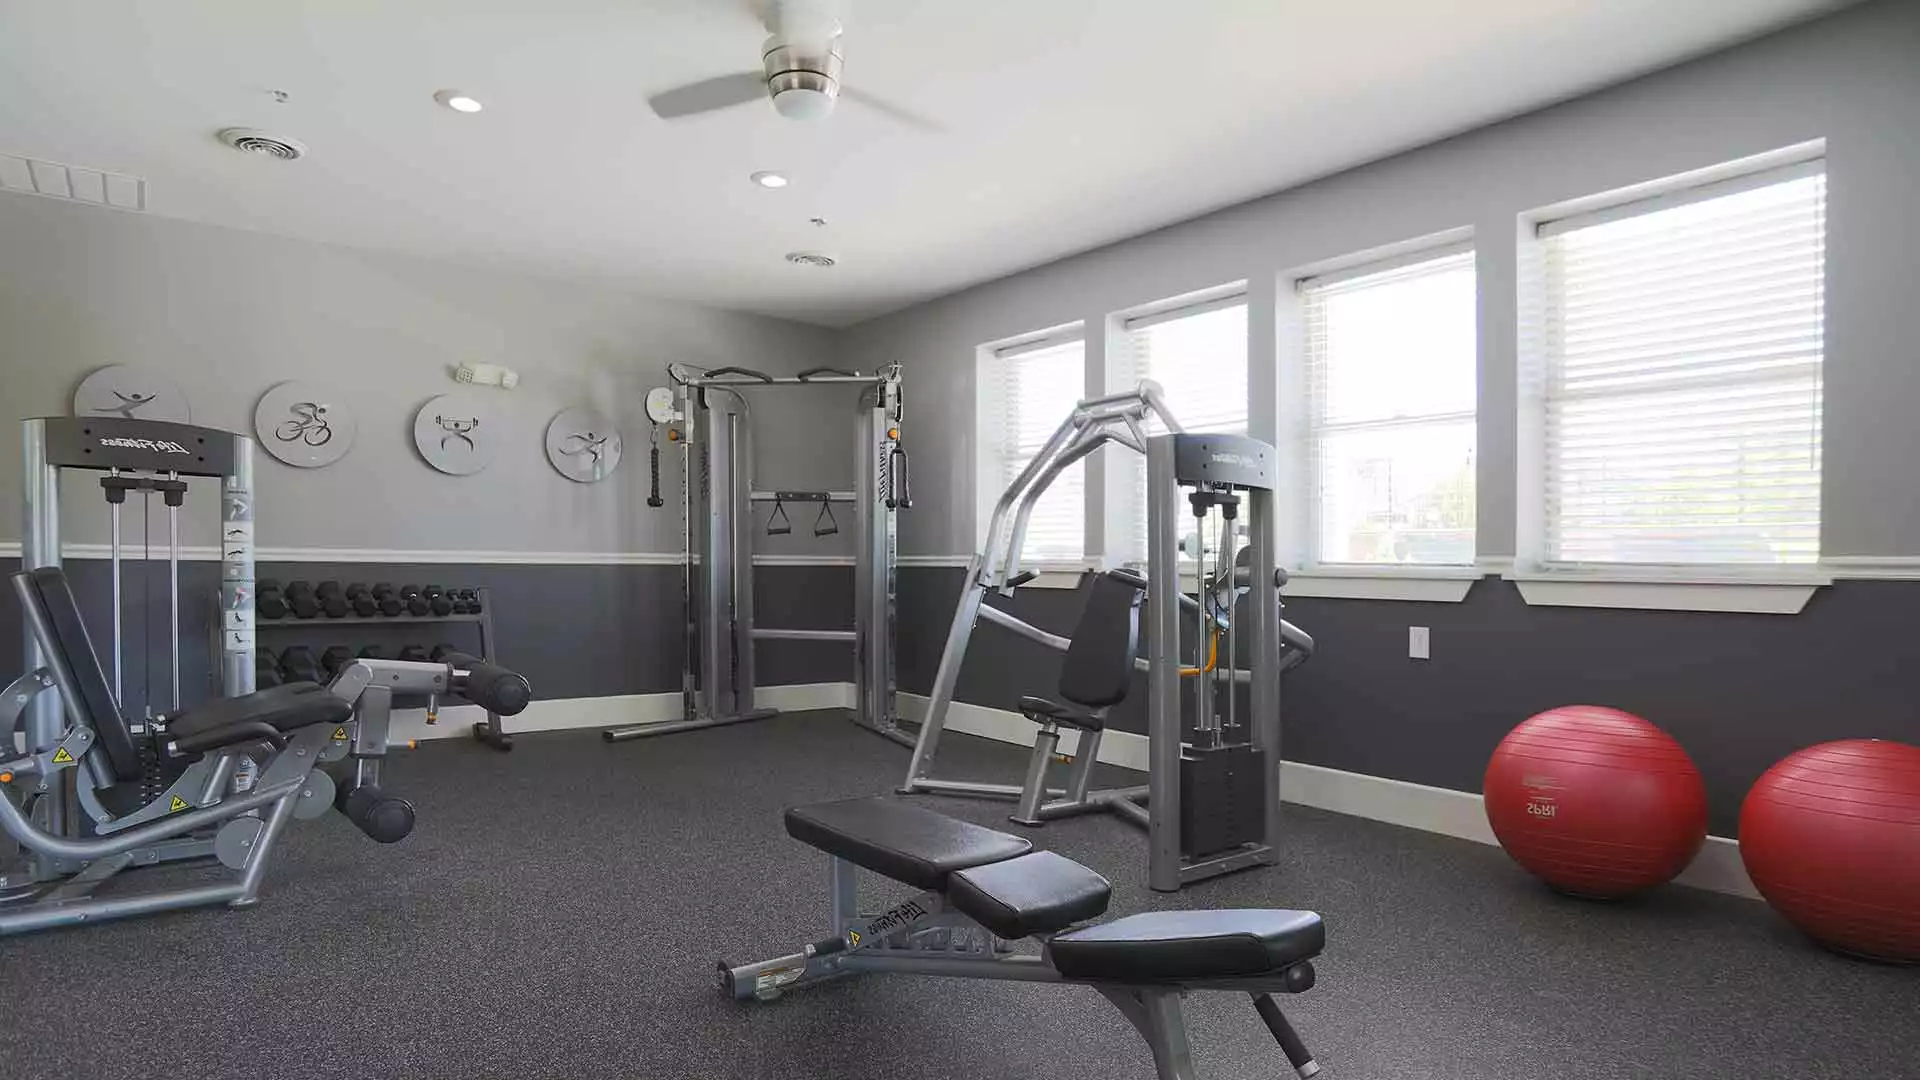 Fitness center with exercise machines and free-weights at Mallard Landing.